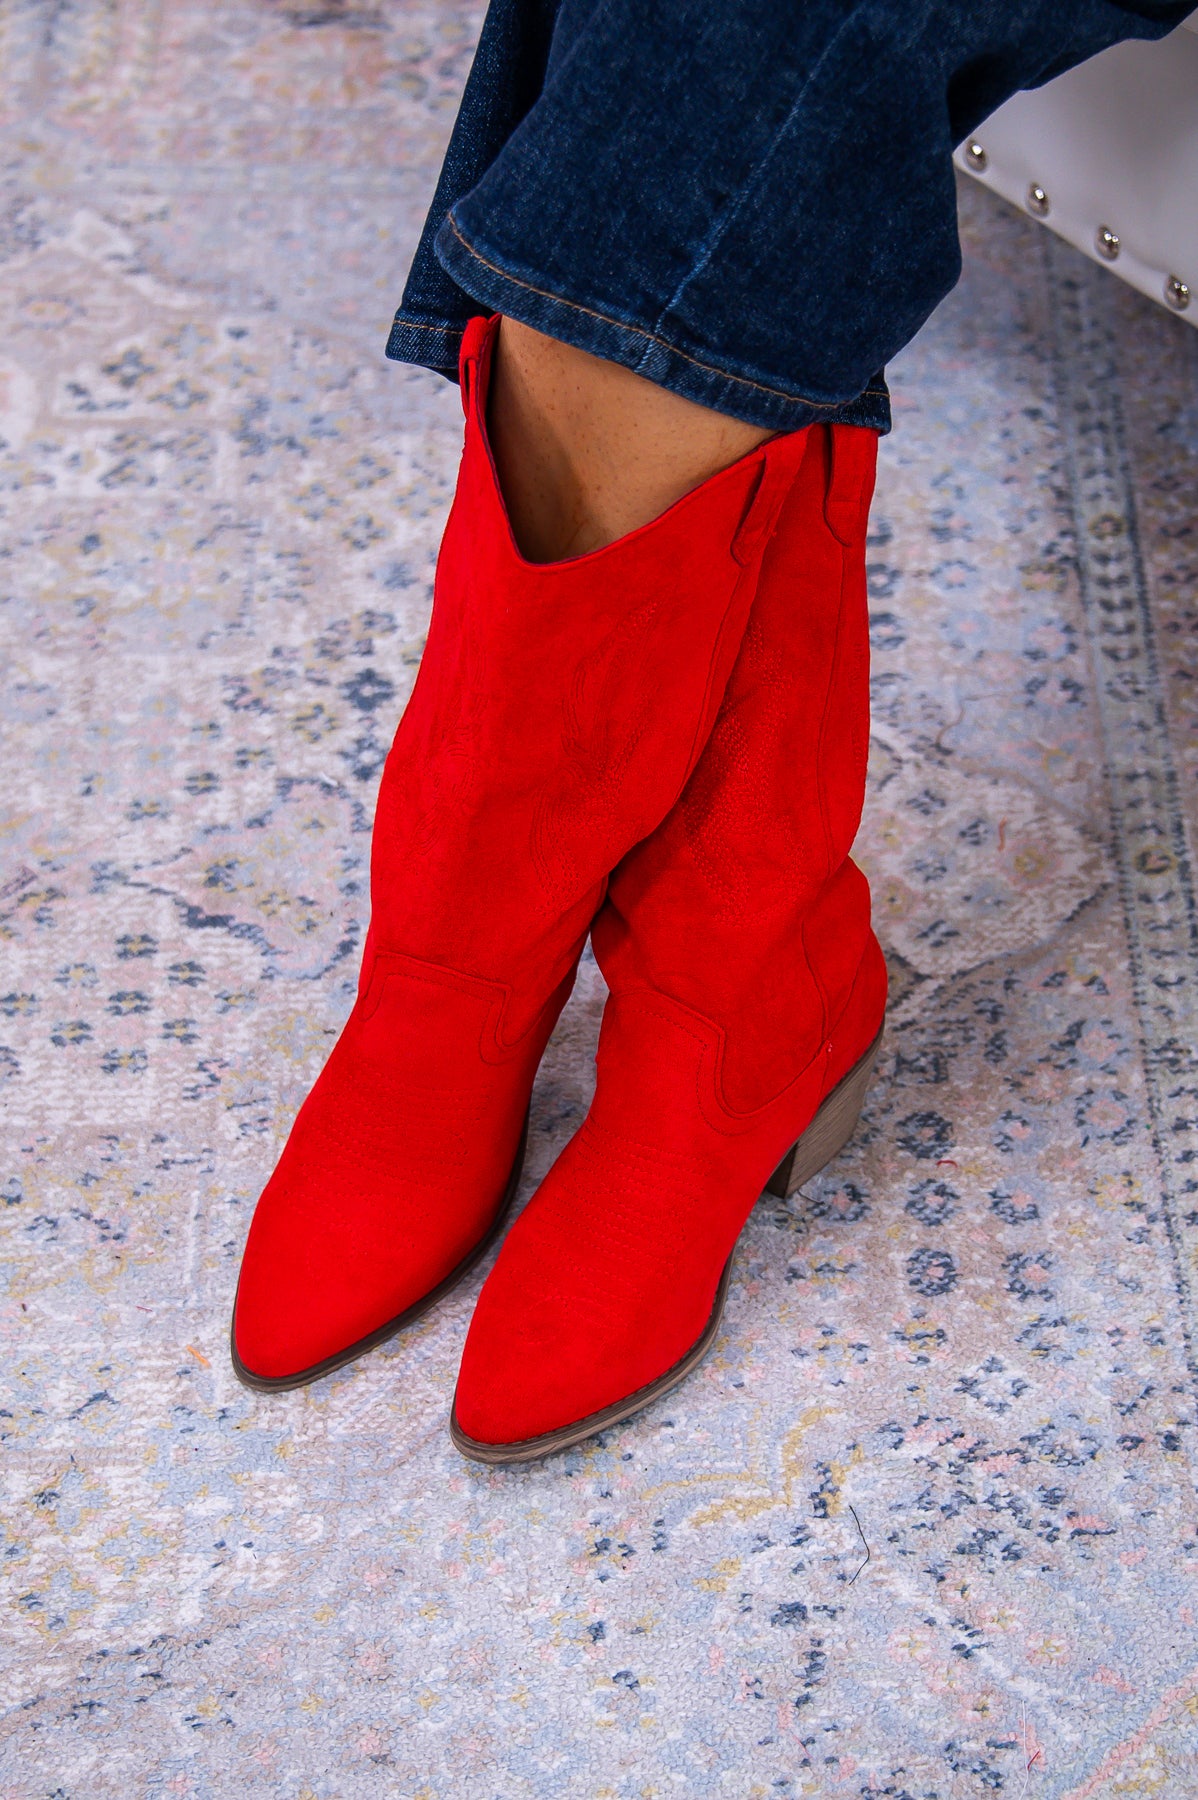 Boots Class And A Little Sass Red Solid Suede Cowgirl Boots - SHO2643RD